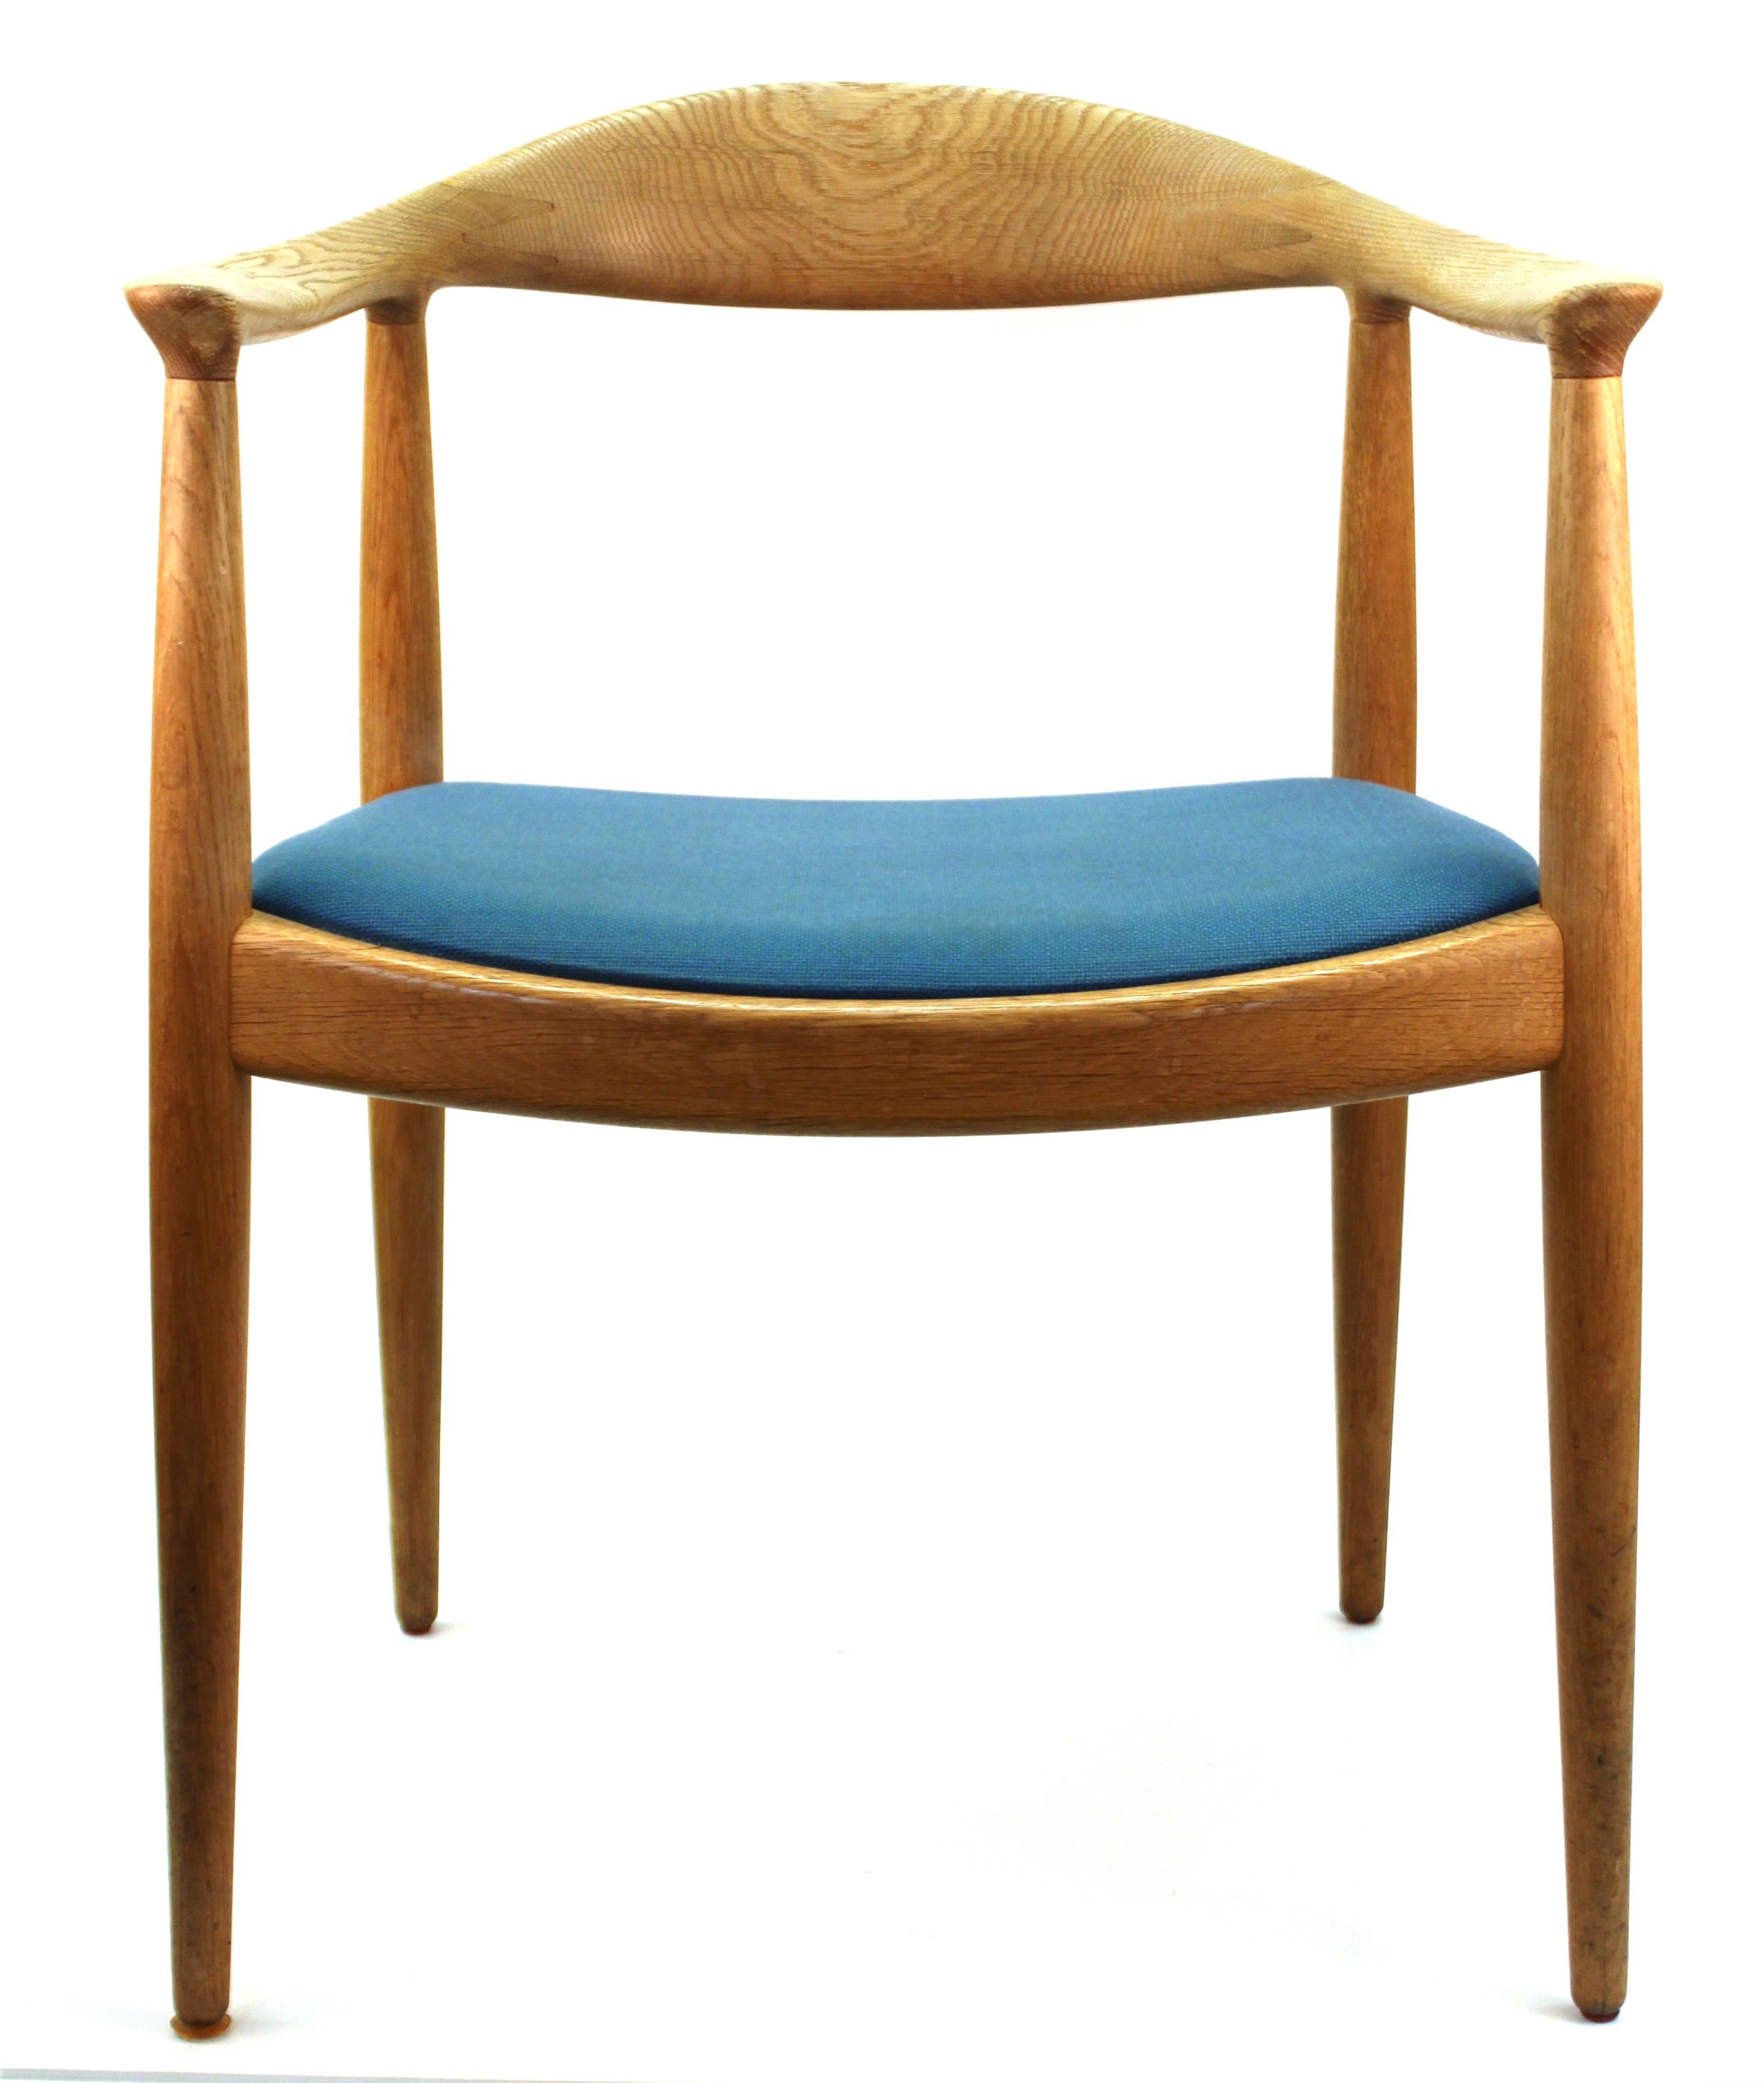 Danish Modern pair of iconic model JH 501 chairs designed by Hans Wegner for Johannes Hansen in the 1950s. The pair is upholstered in light blue fabric and has branded makers marks on the underside of the seating structure. The pair is in great